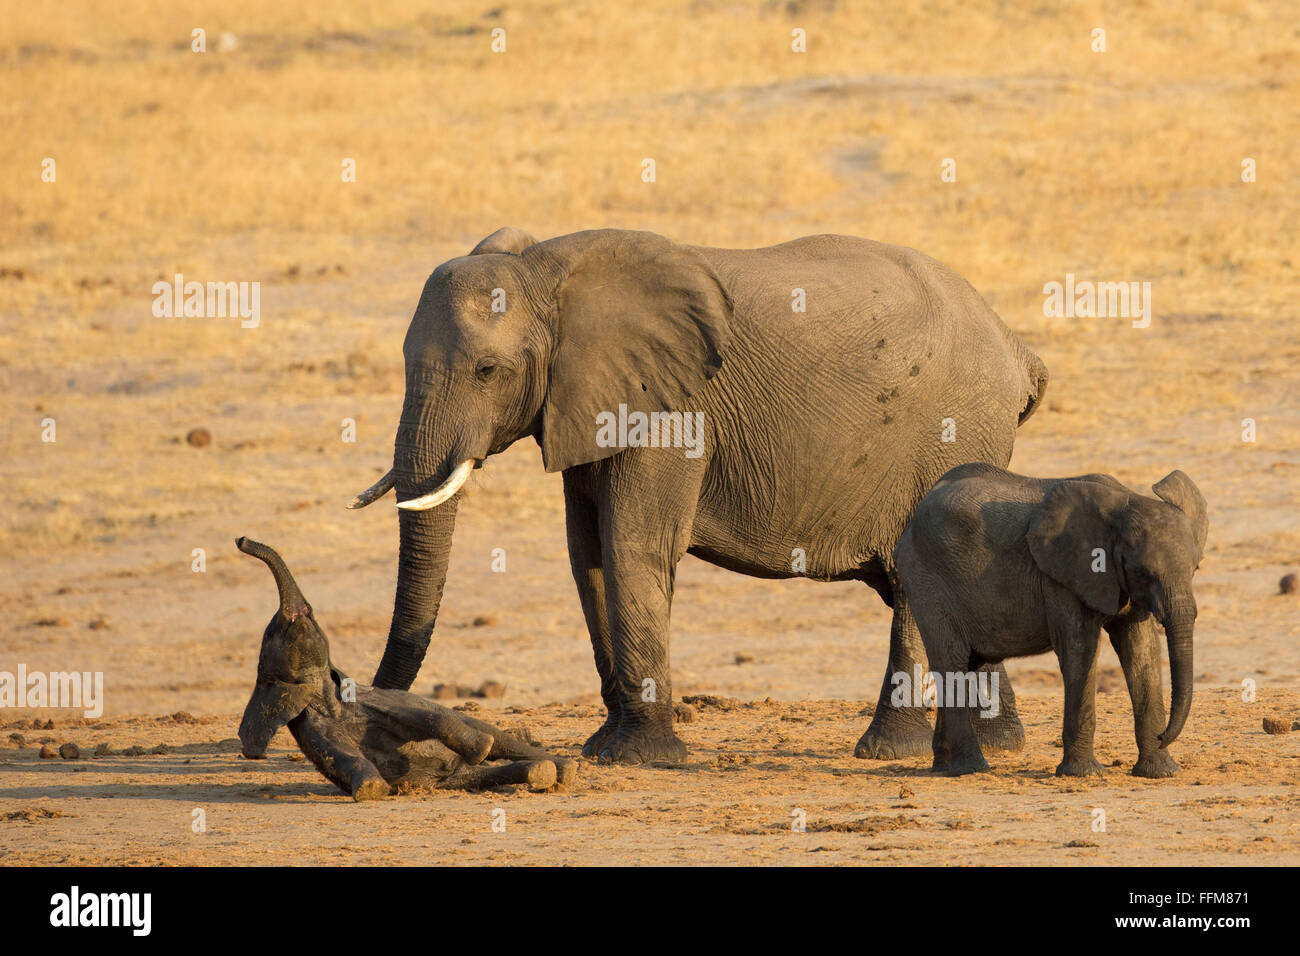 Elephant cow with a baby falling over onto its back comically Stock Photo